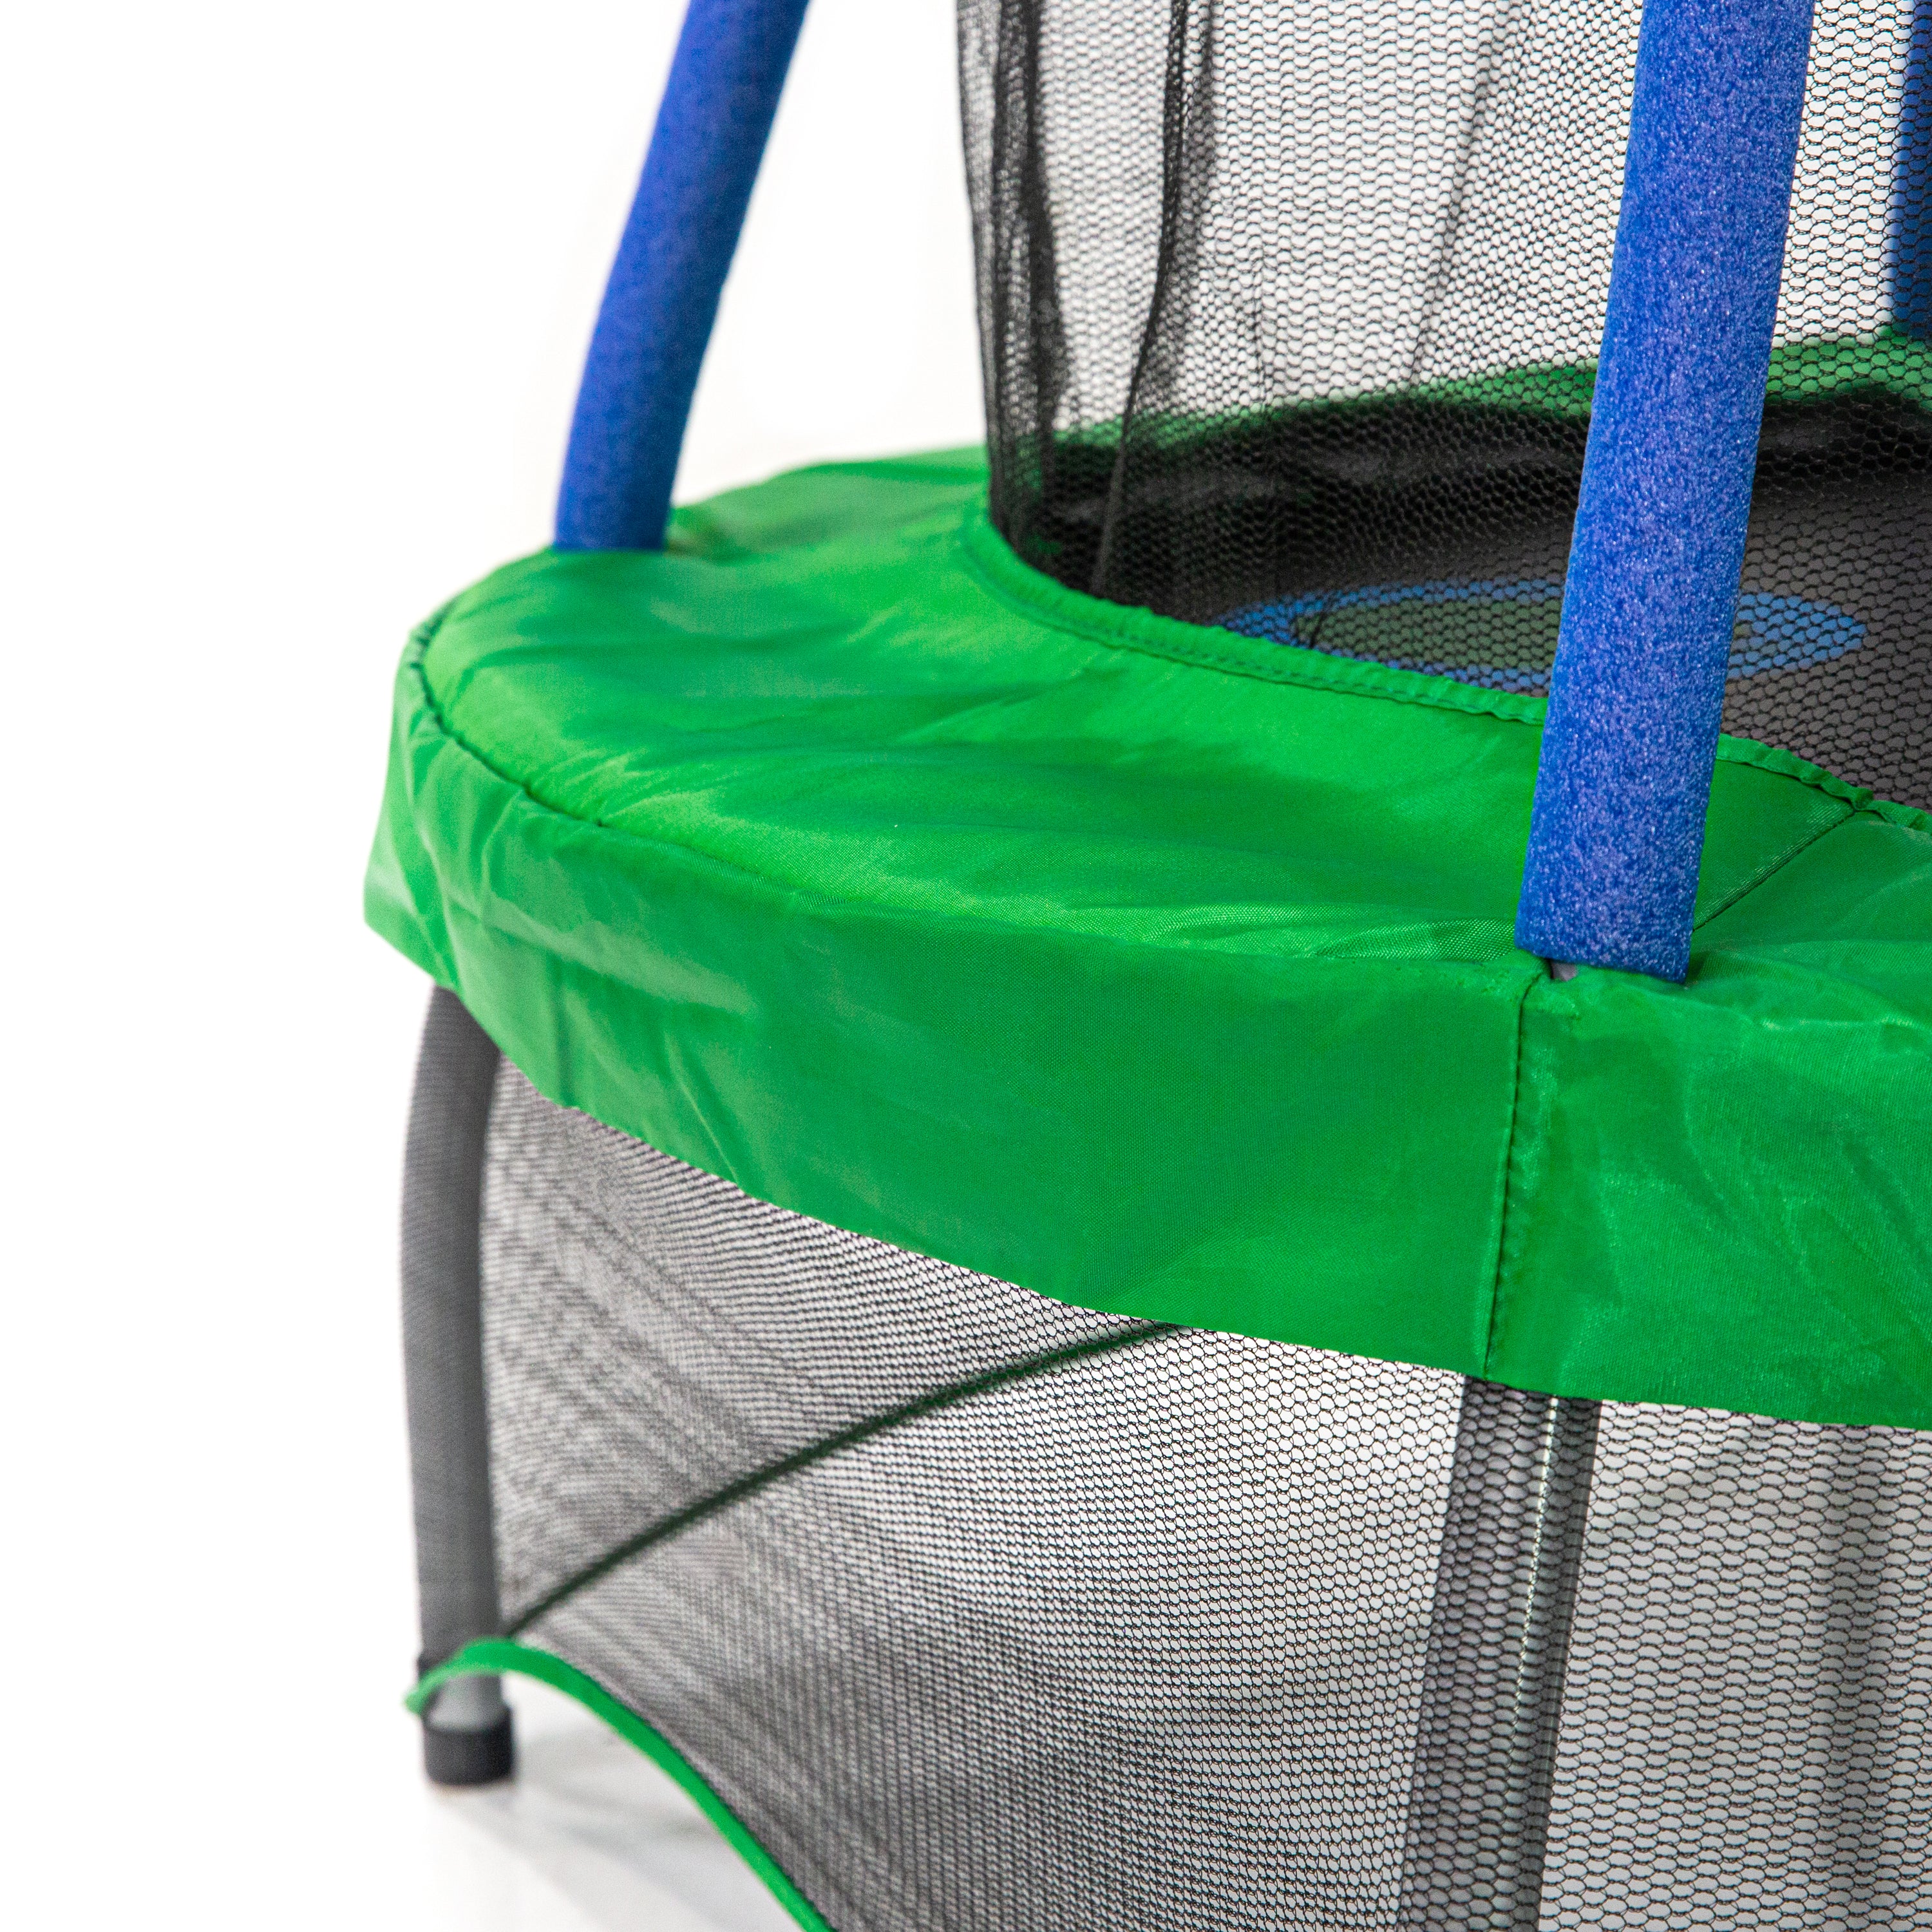 Blue foam-padded enclosure poles go through holes in the bright green frame pad. 